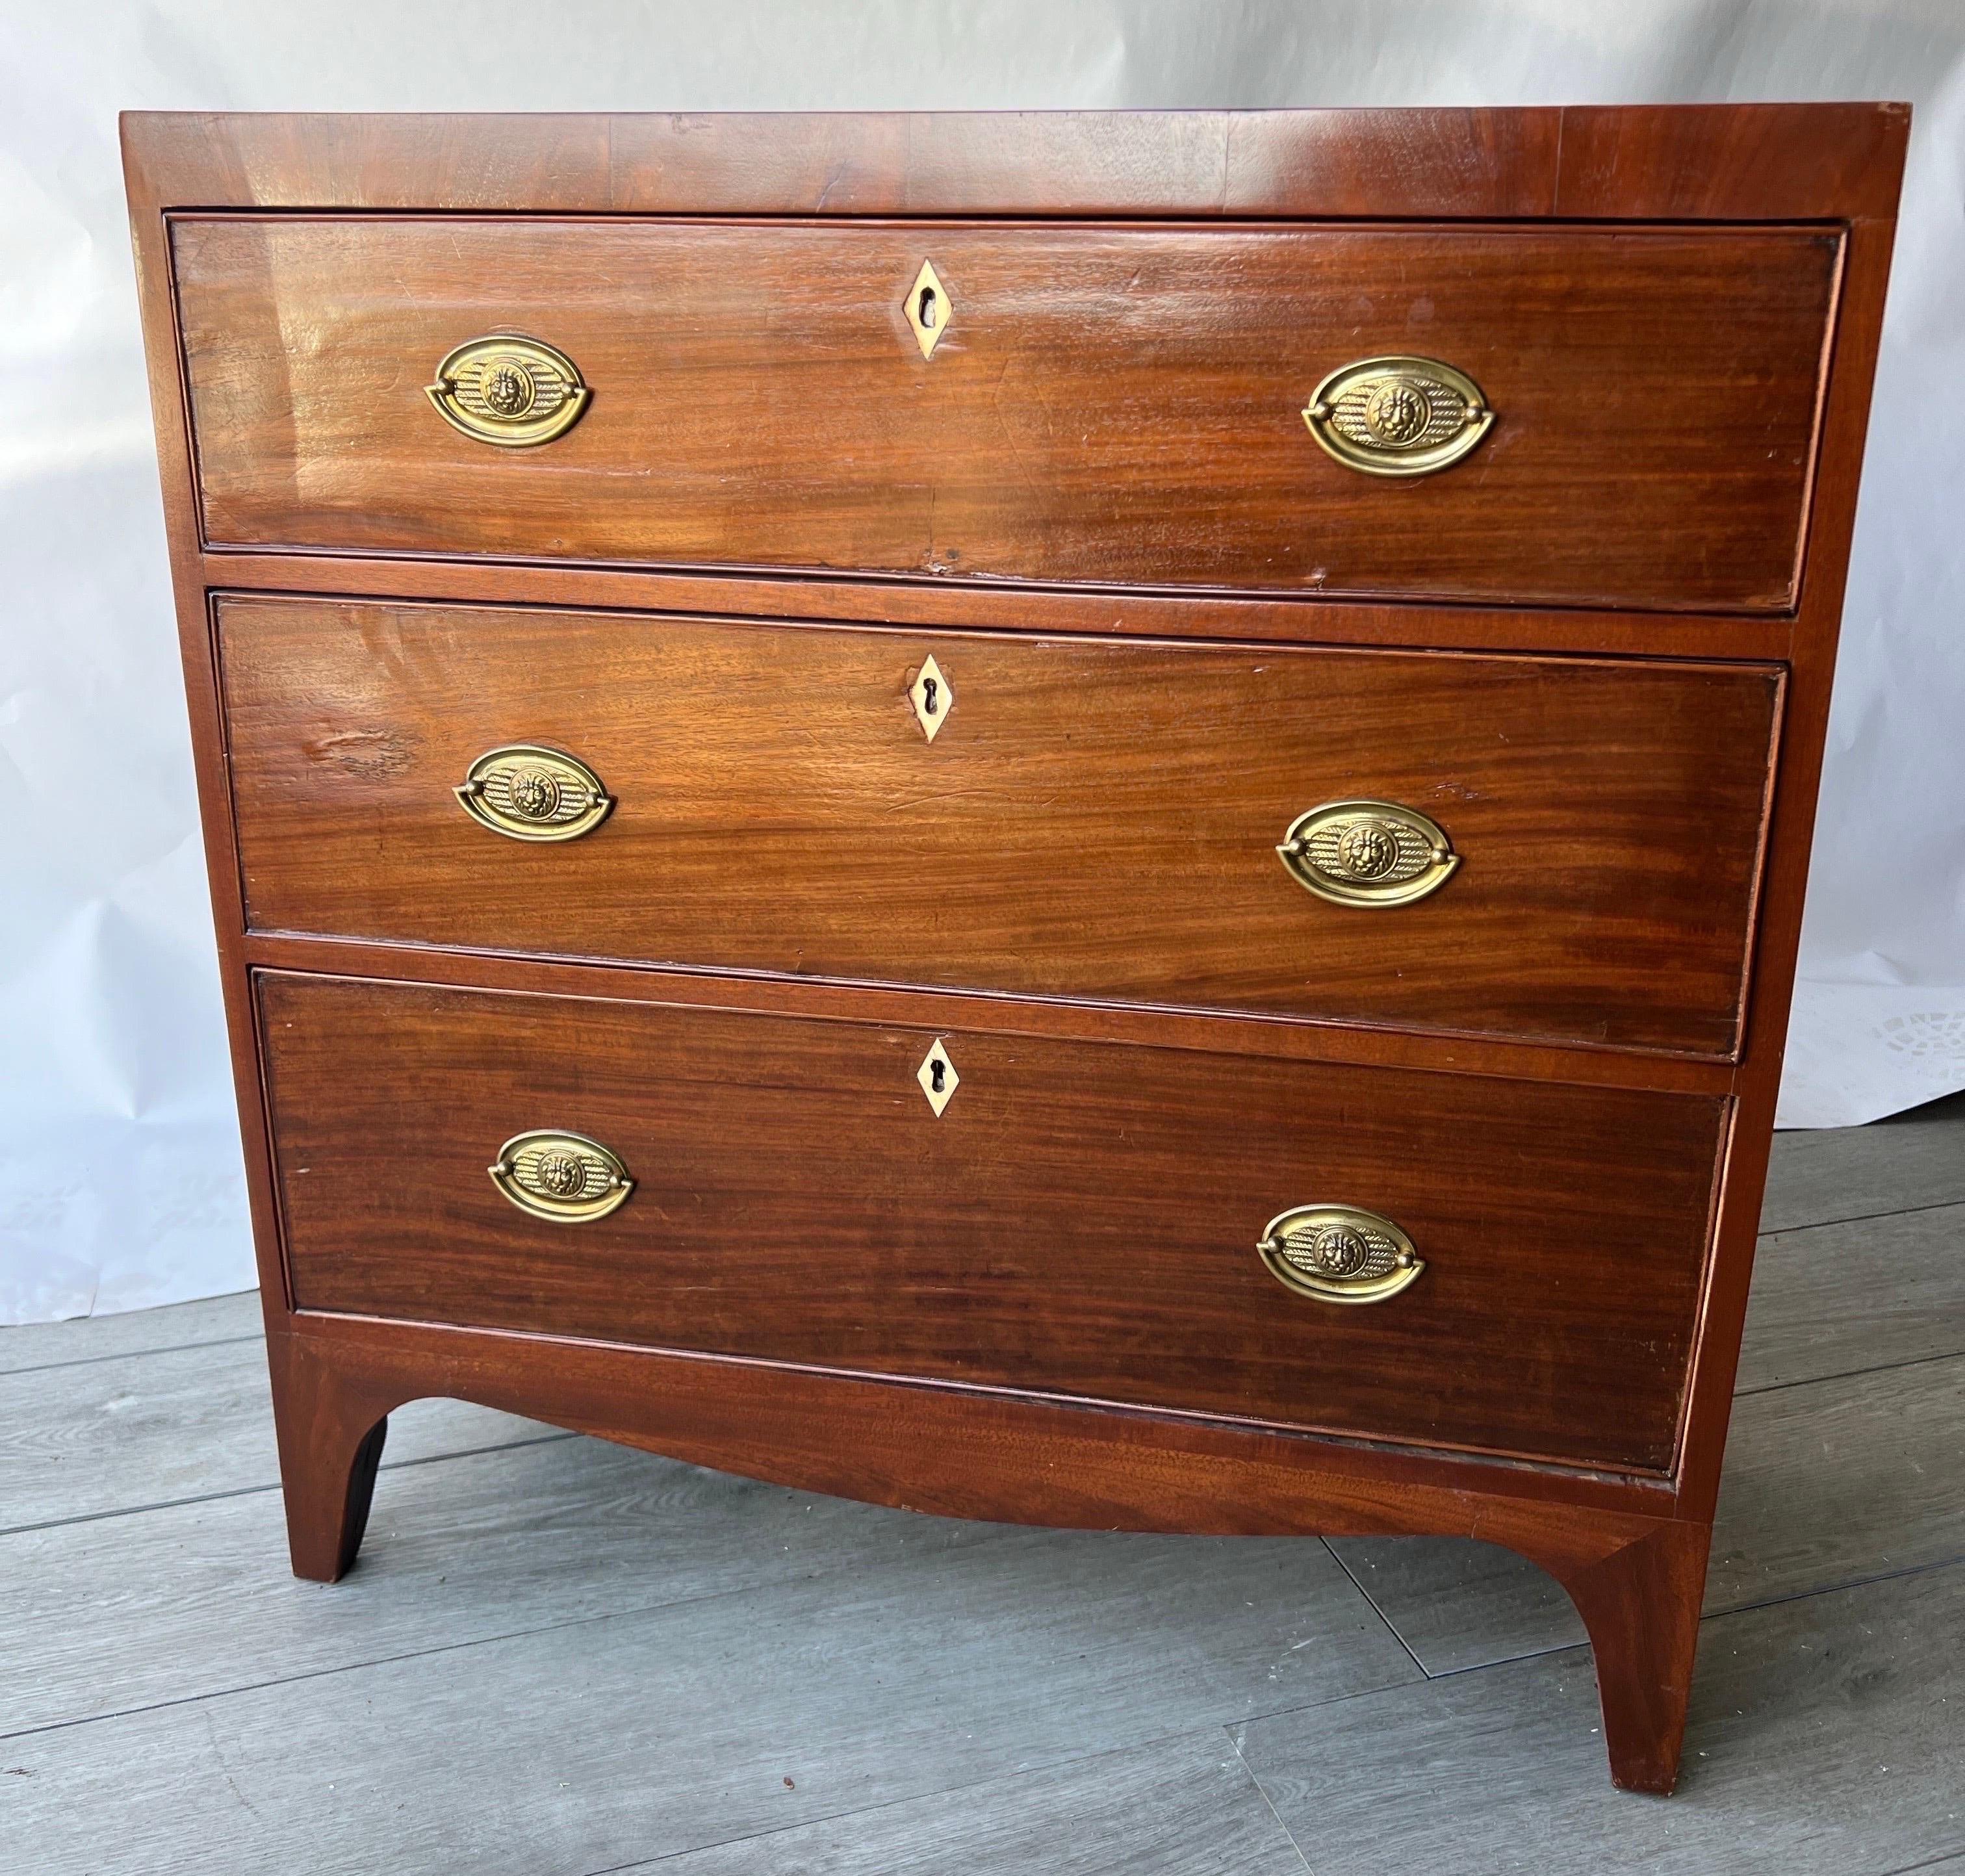 Great little 19th century English regency period bedside chest. Decorated with lion head pulls and featuring inlaid bone escutcheons. The depth is less than 14” , which makes this a very desirable chest for small nooks and bedrooms. 